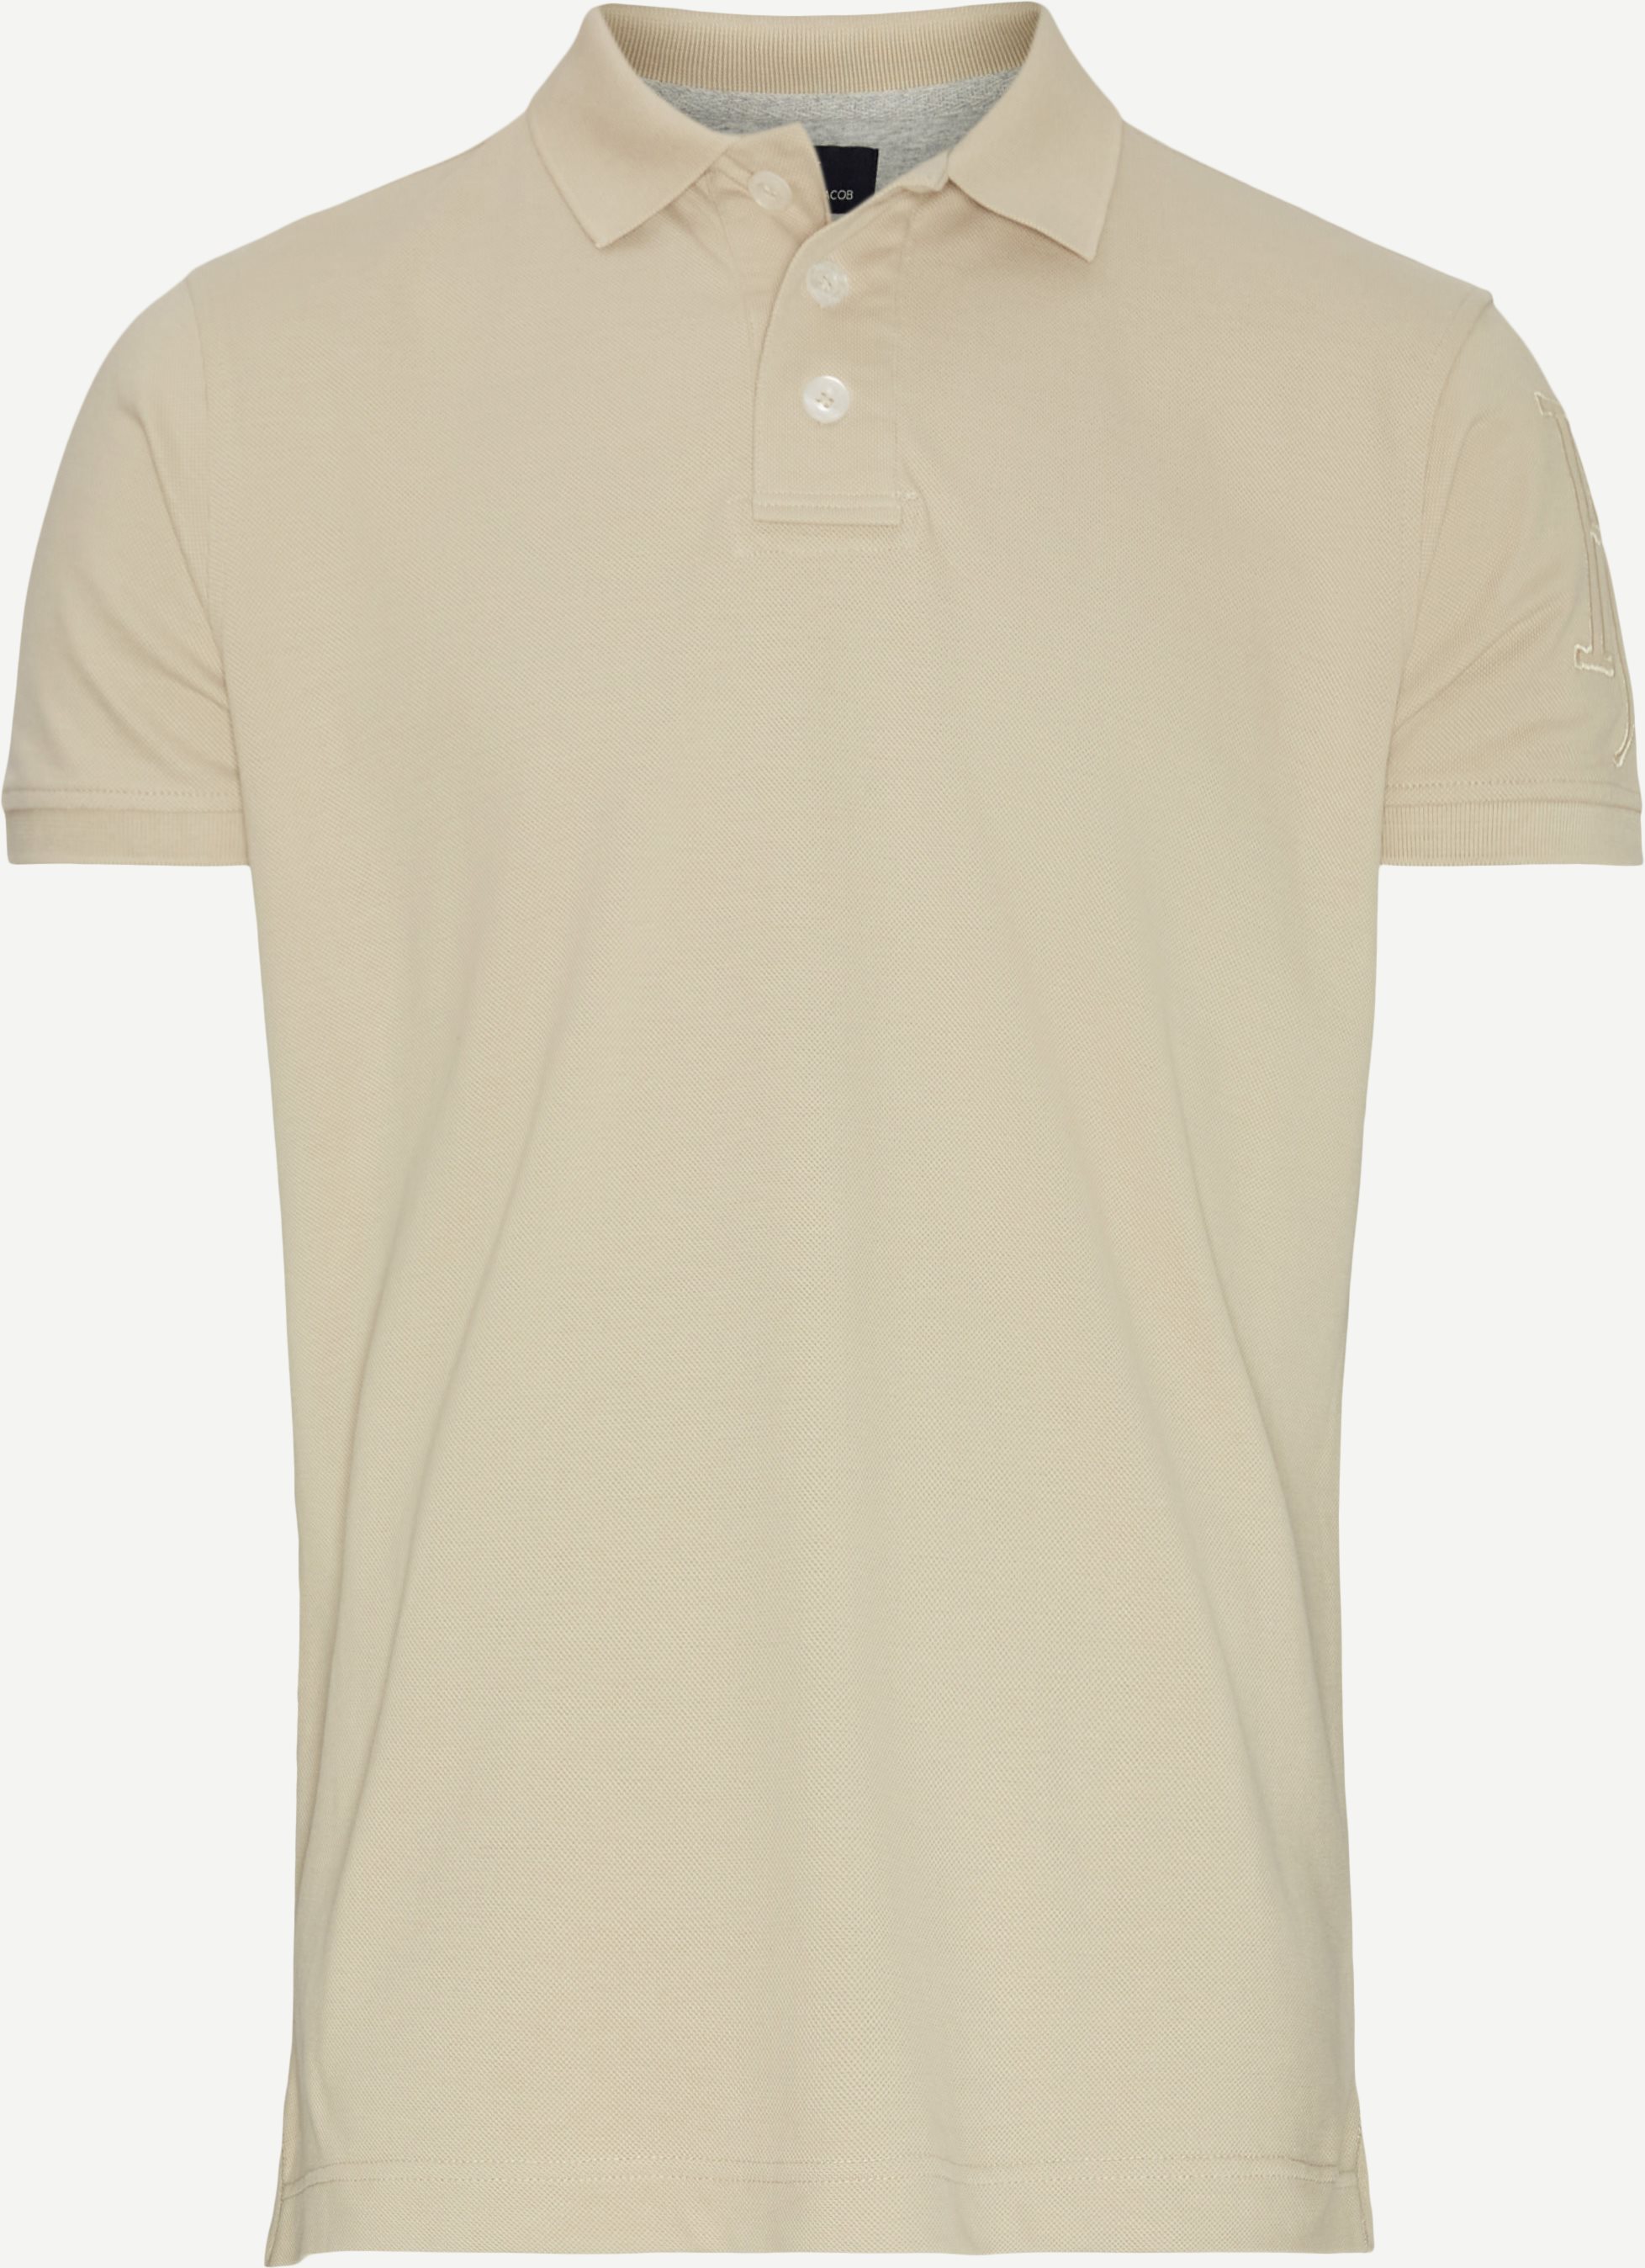 Rough Style Polo - T-shirts - Regular fit - Sand